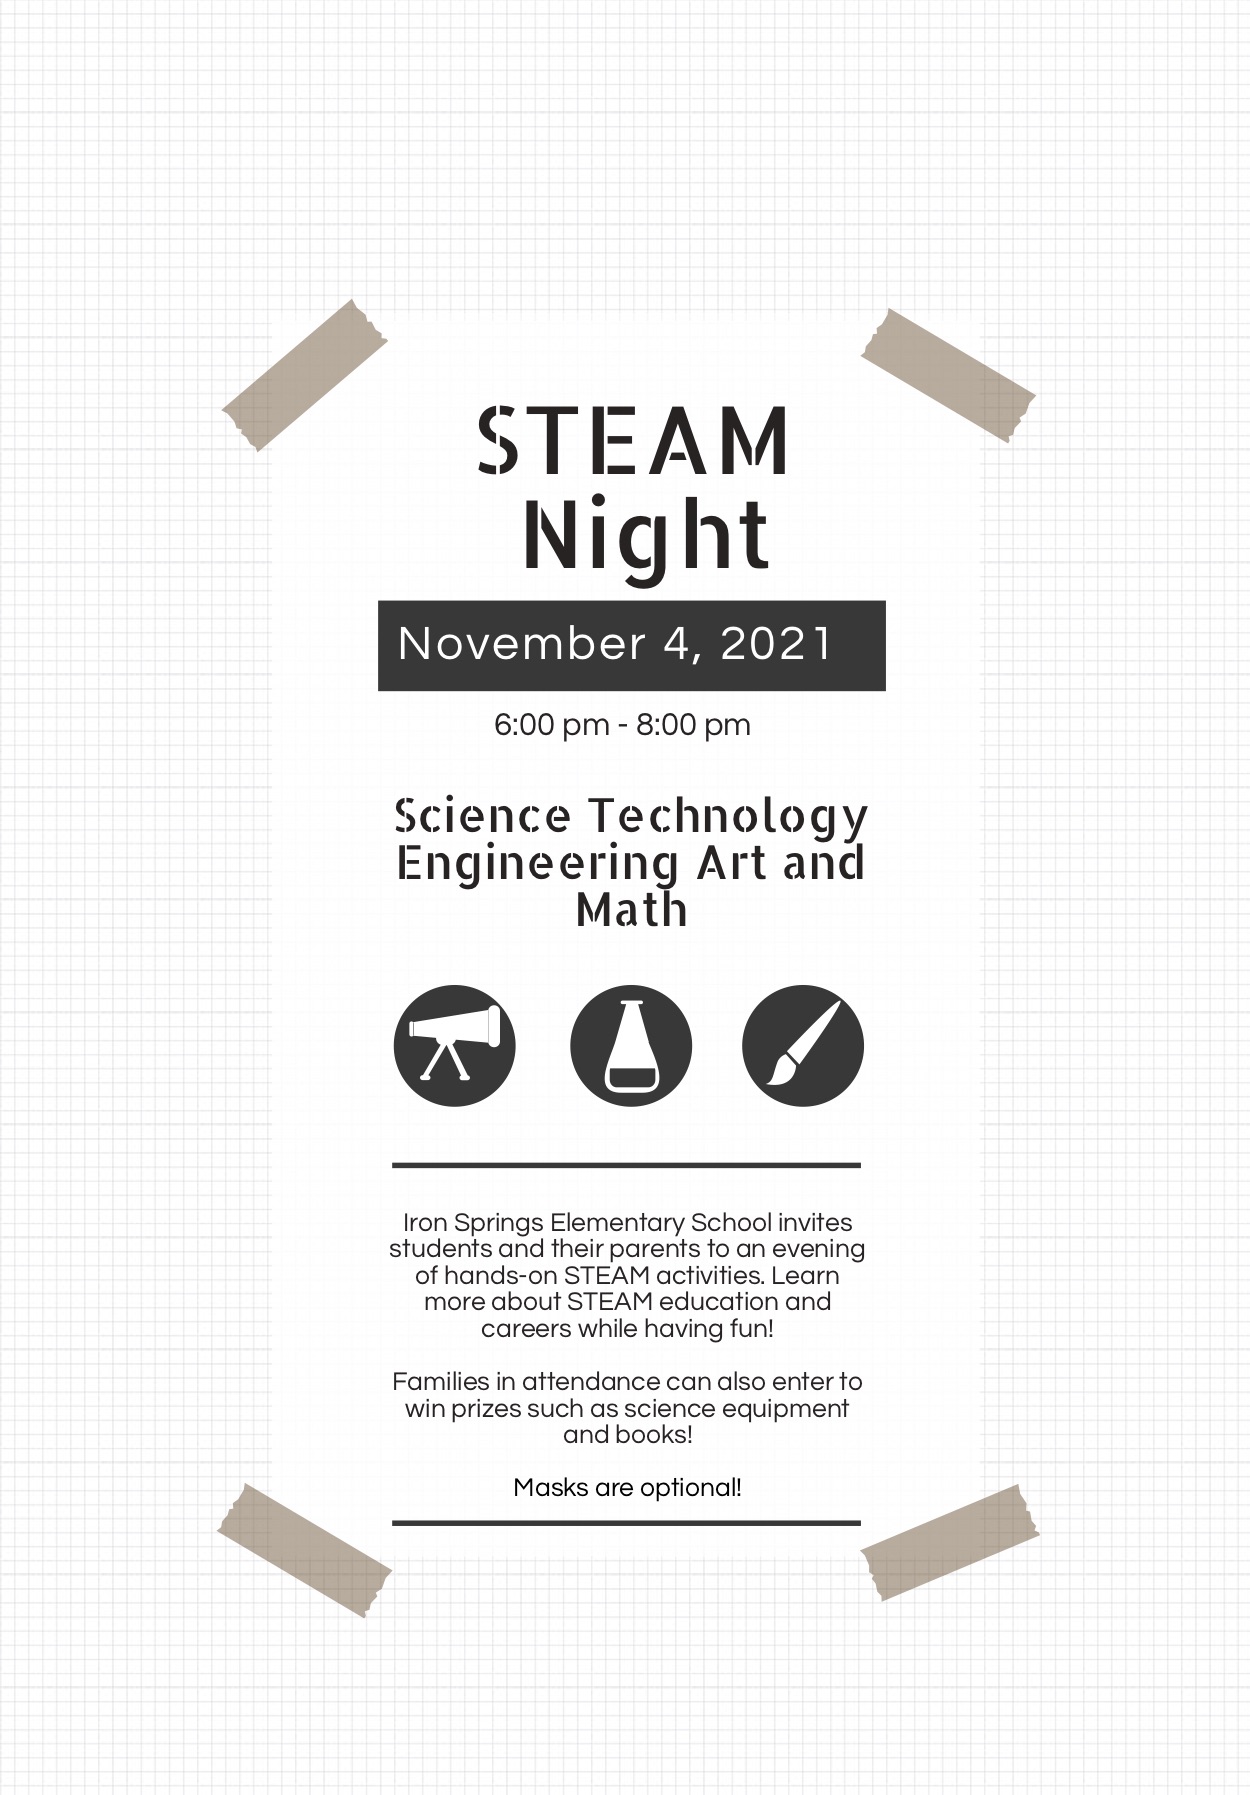 STEM NIGHT IS November 4th from 6:00 pm – 8:00 pm